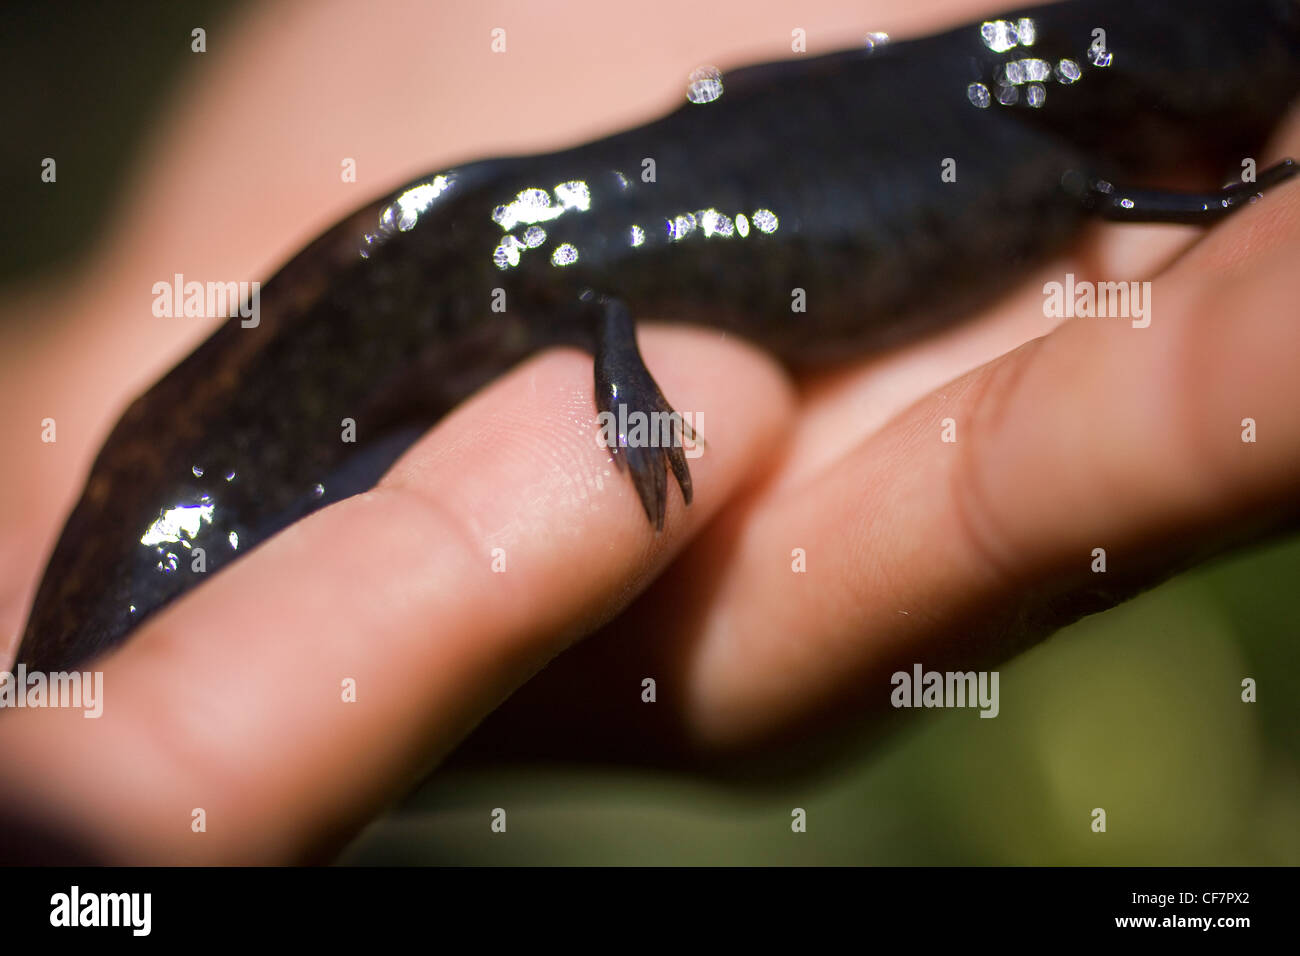 A man holds one axolotl or ajolote, ambystoma mexicanum, a type of salamander, in Xochimilco, Mexico City. Stock Photo